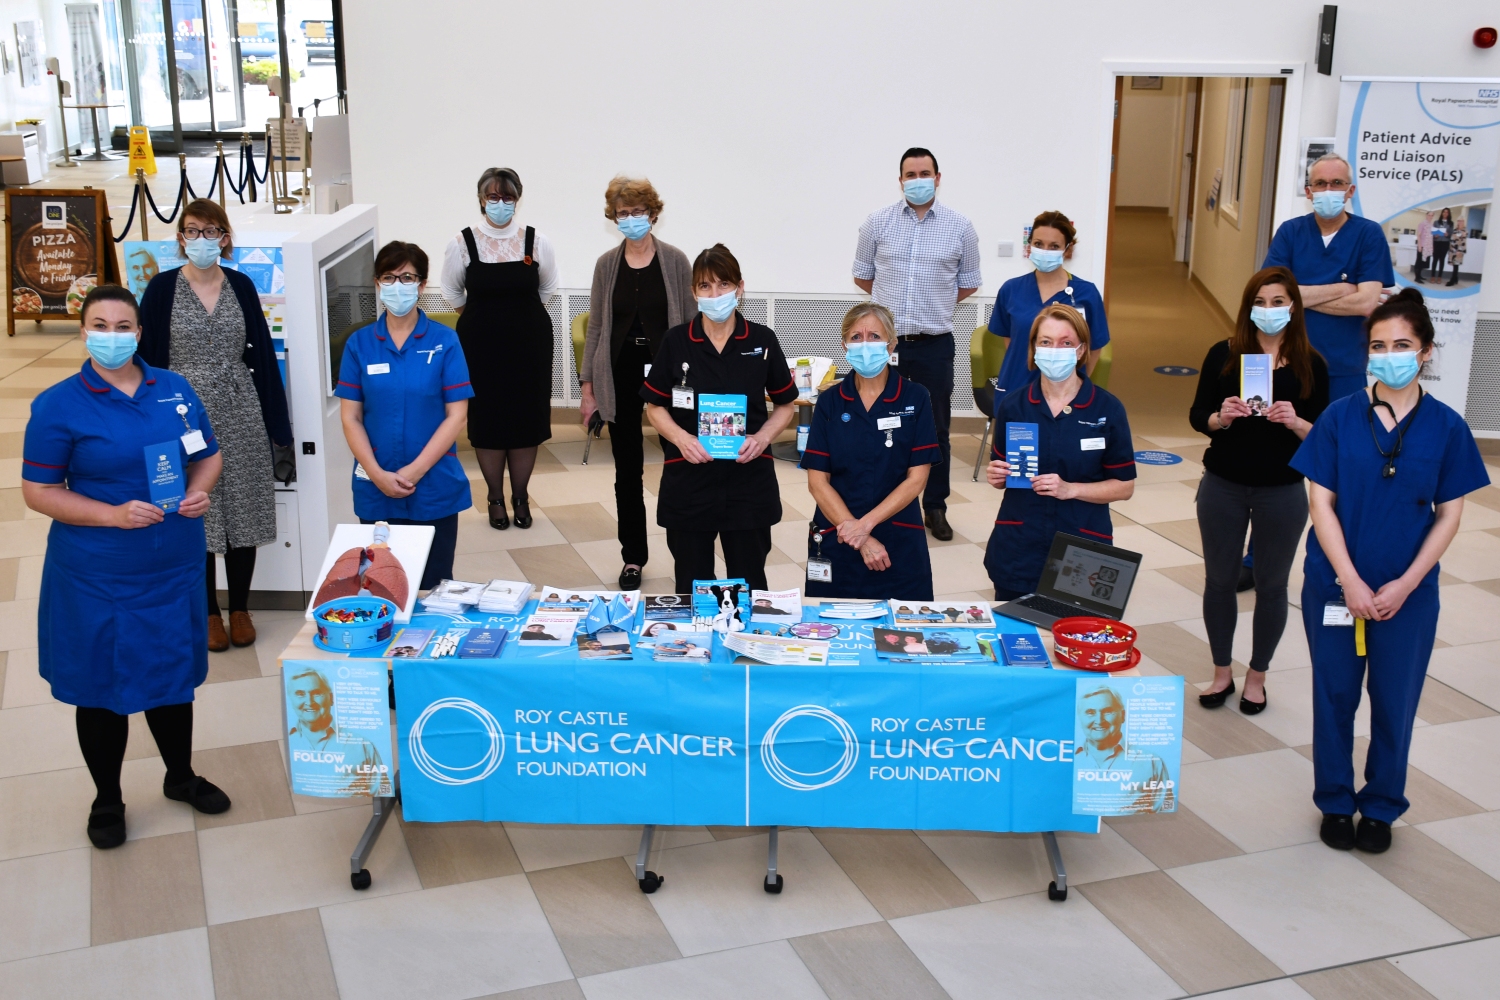 A group of people standing inside a hospital wearing masks.